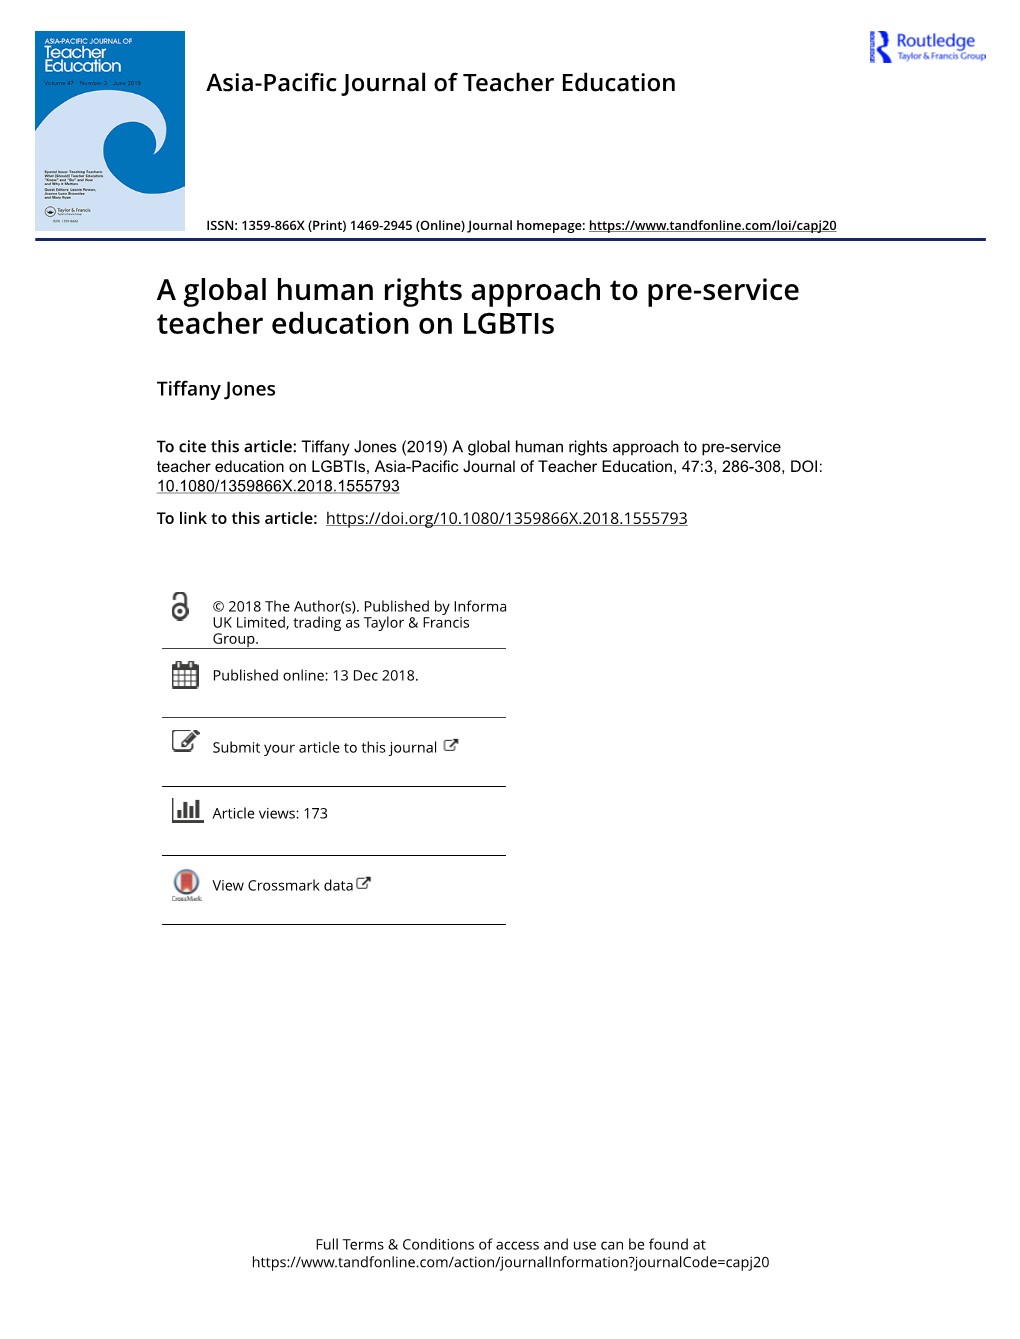 A Global Human Rights Approach to Pre-Service Teacher Education on Lgbtis